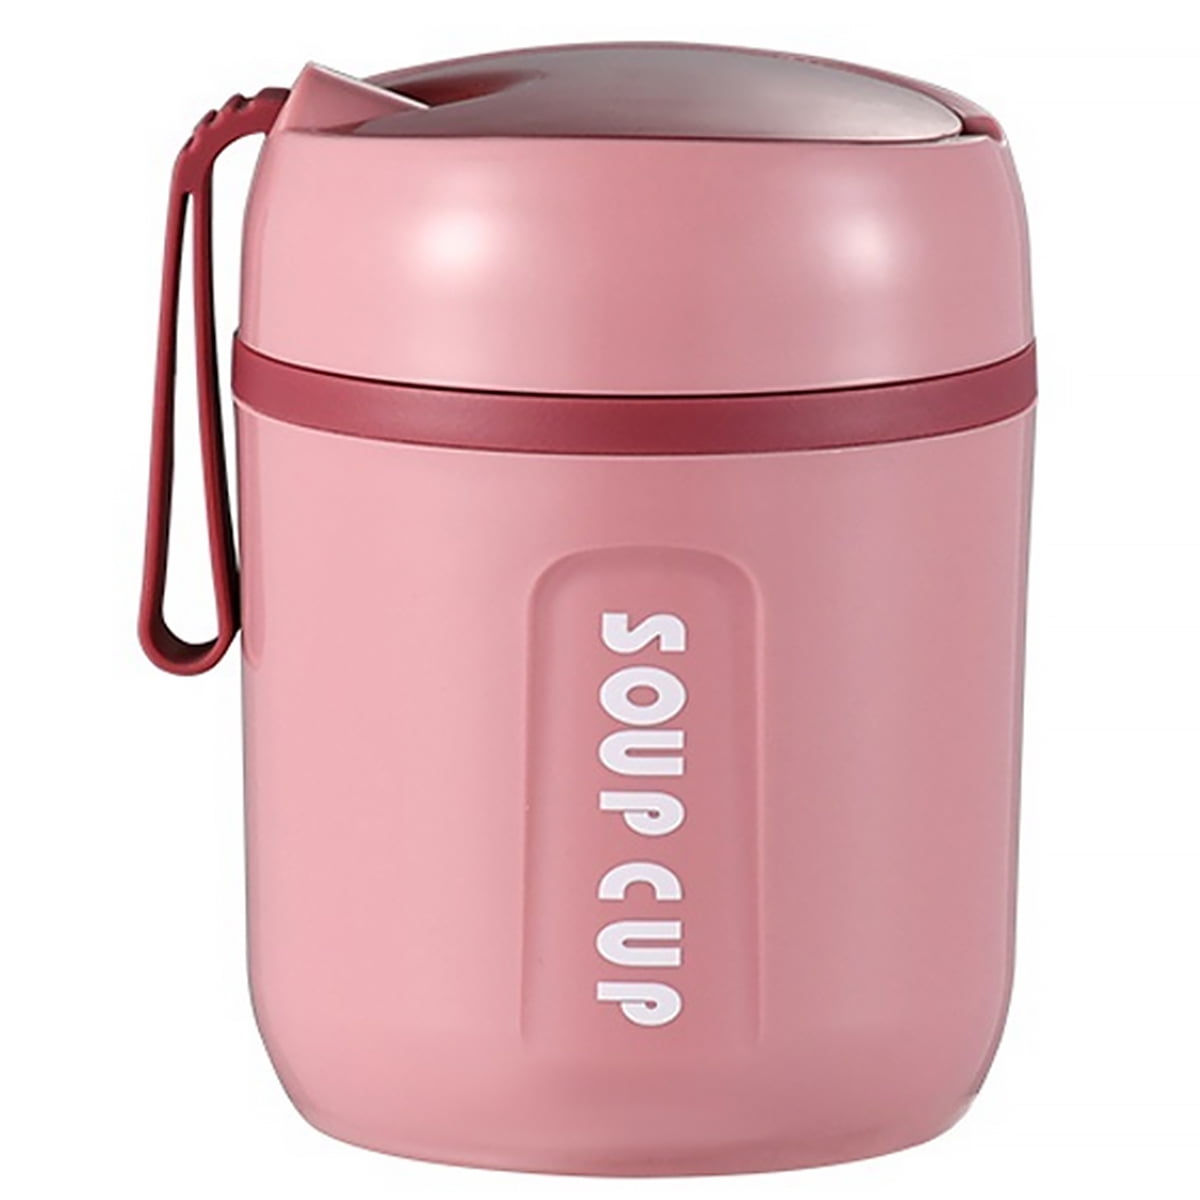 Portable Thermal Insulated Lunch Box Bento Stainless Steel Food Container School 